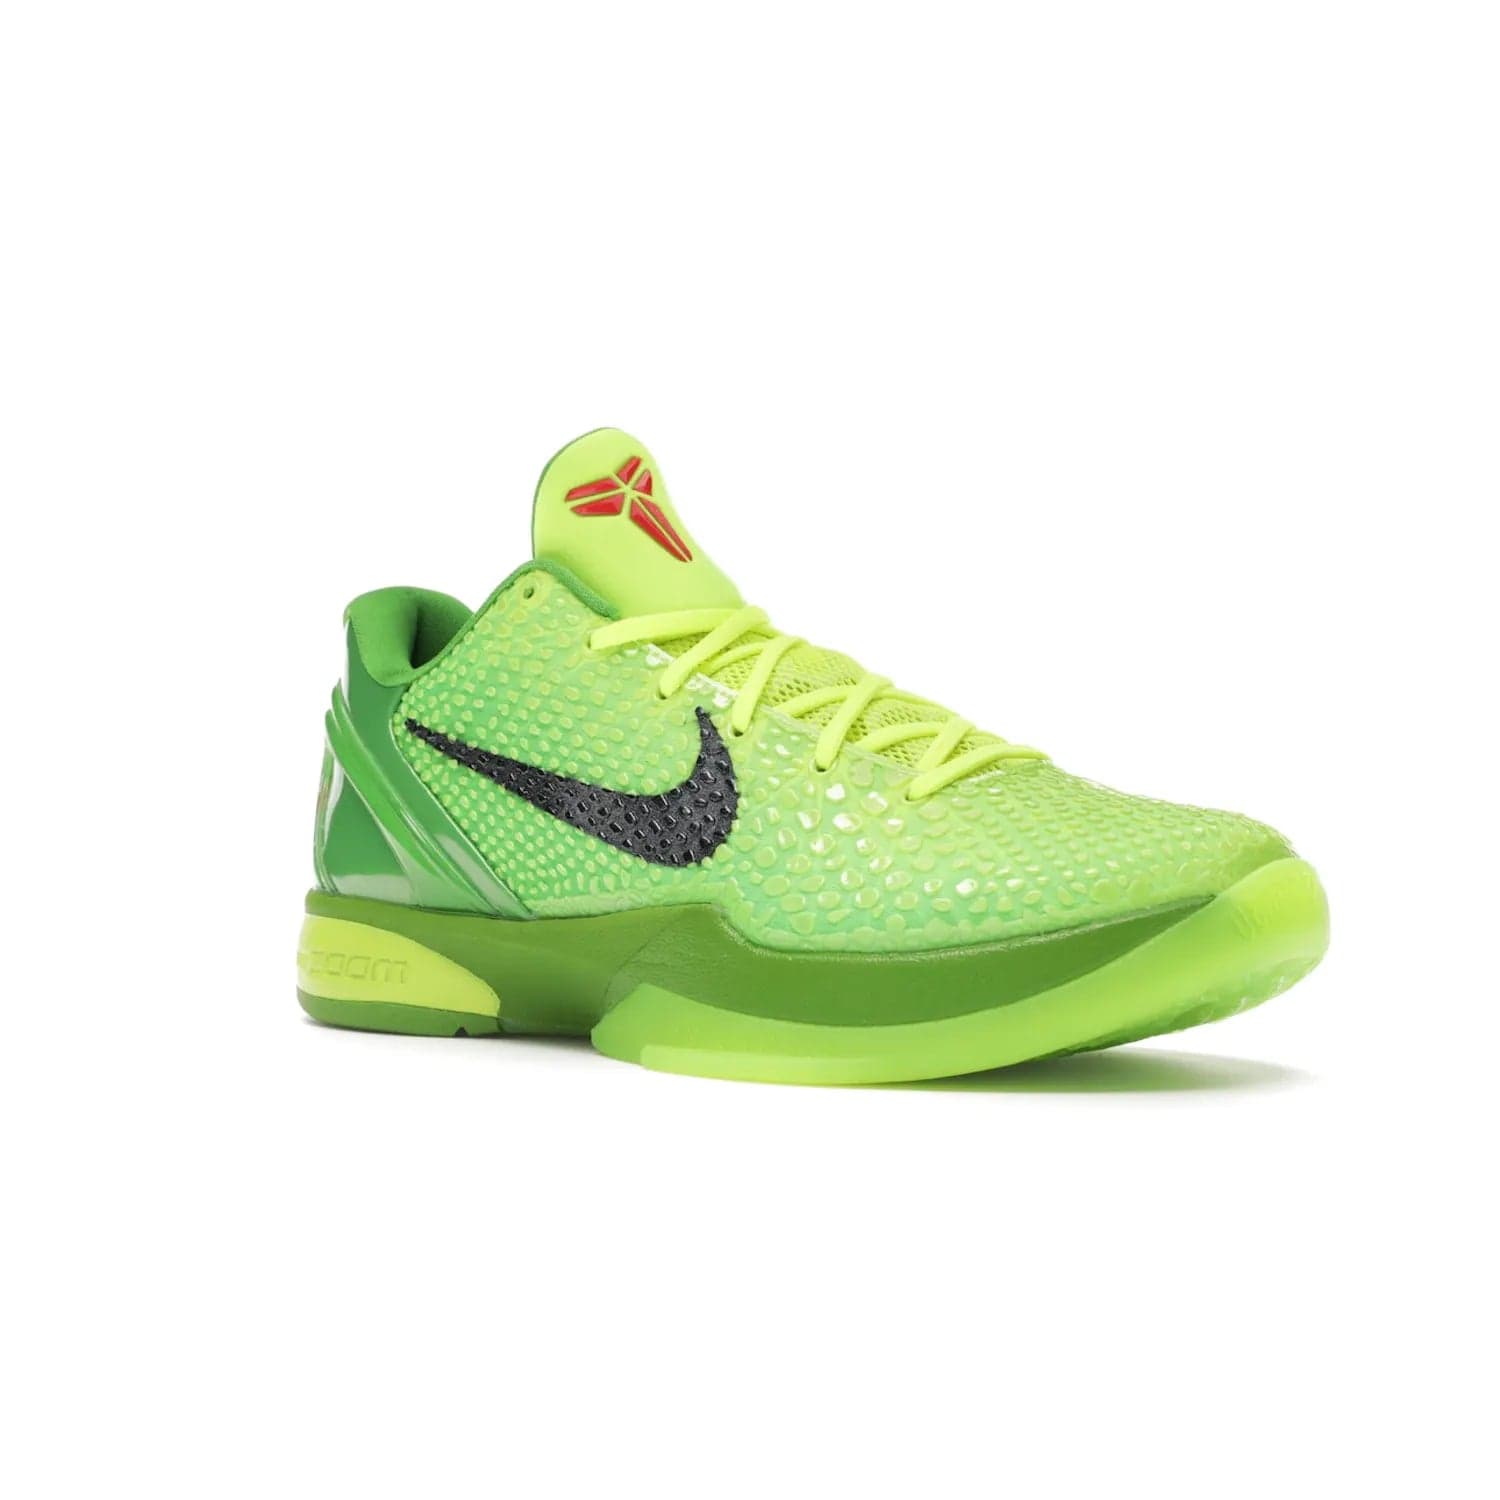 Nike Kobe 6 Protro Grinch (2020) - Image 5 - Only at www.BallersClubKickz.com - #
The Nike Kobe 6 Protro Grinch updates the iconic 2011 design with modern tech like a Zoom Air cushioning system, scaled-down traction, and updated silhouette. Experience the textured Green Apple and Volt upper plus bright red and green accents for $180.